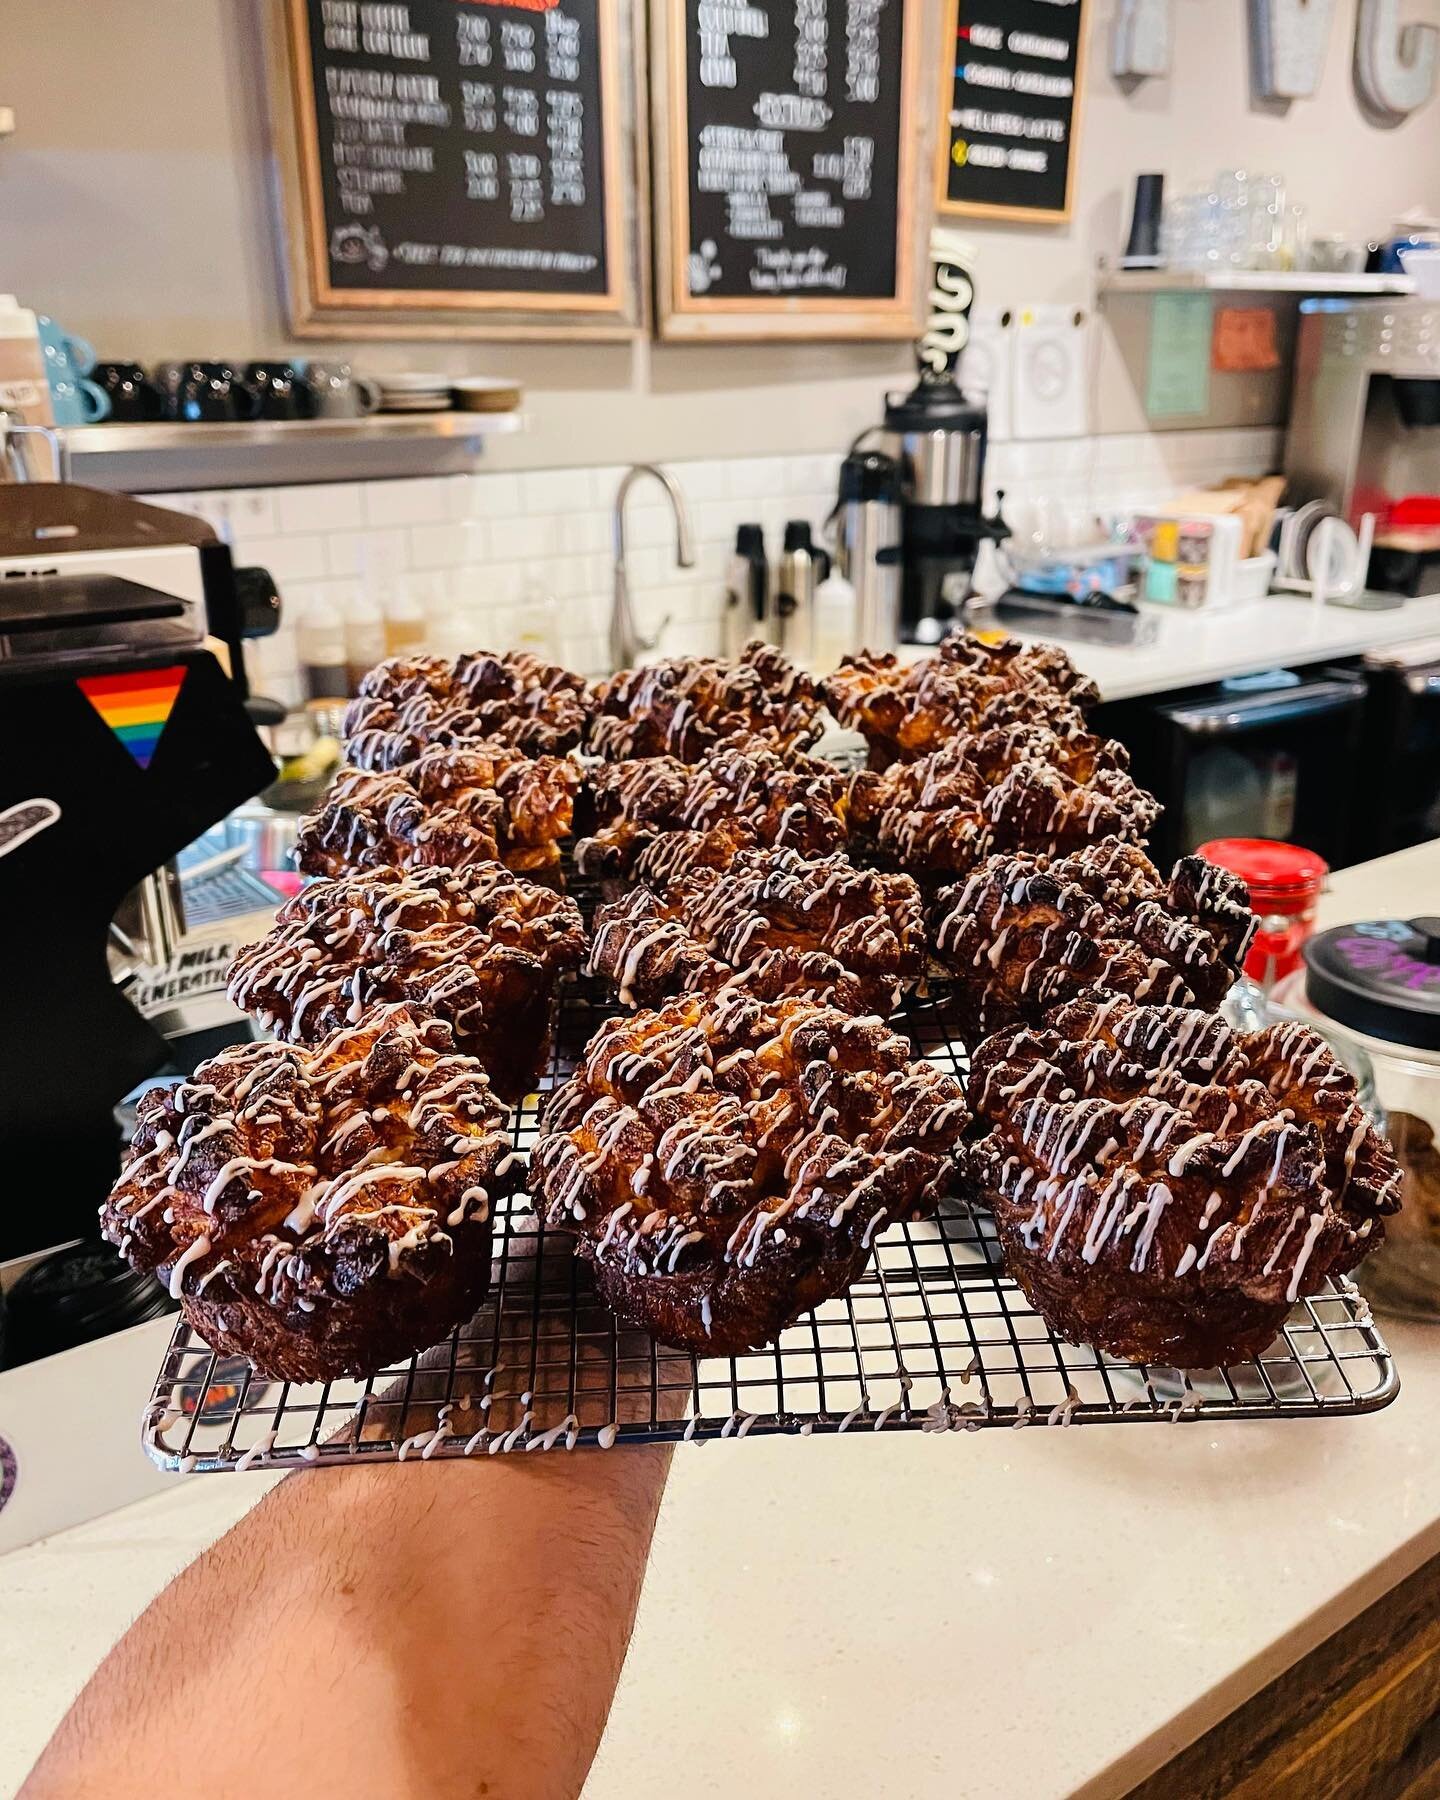 What does Anita do with the leftover croissants you may ask? She turns them into this deliciousness 🤩: the Cro-Muffin, a monkey-bread type muffin made from croissant dough, glazed with cinnamon drizzle. Come by Fridays and Saturdays after 11 to catc